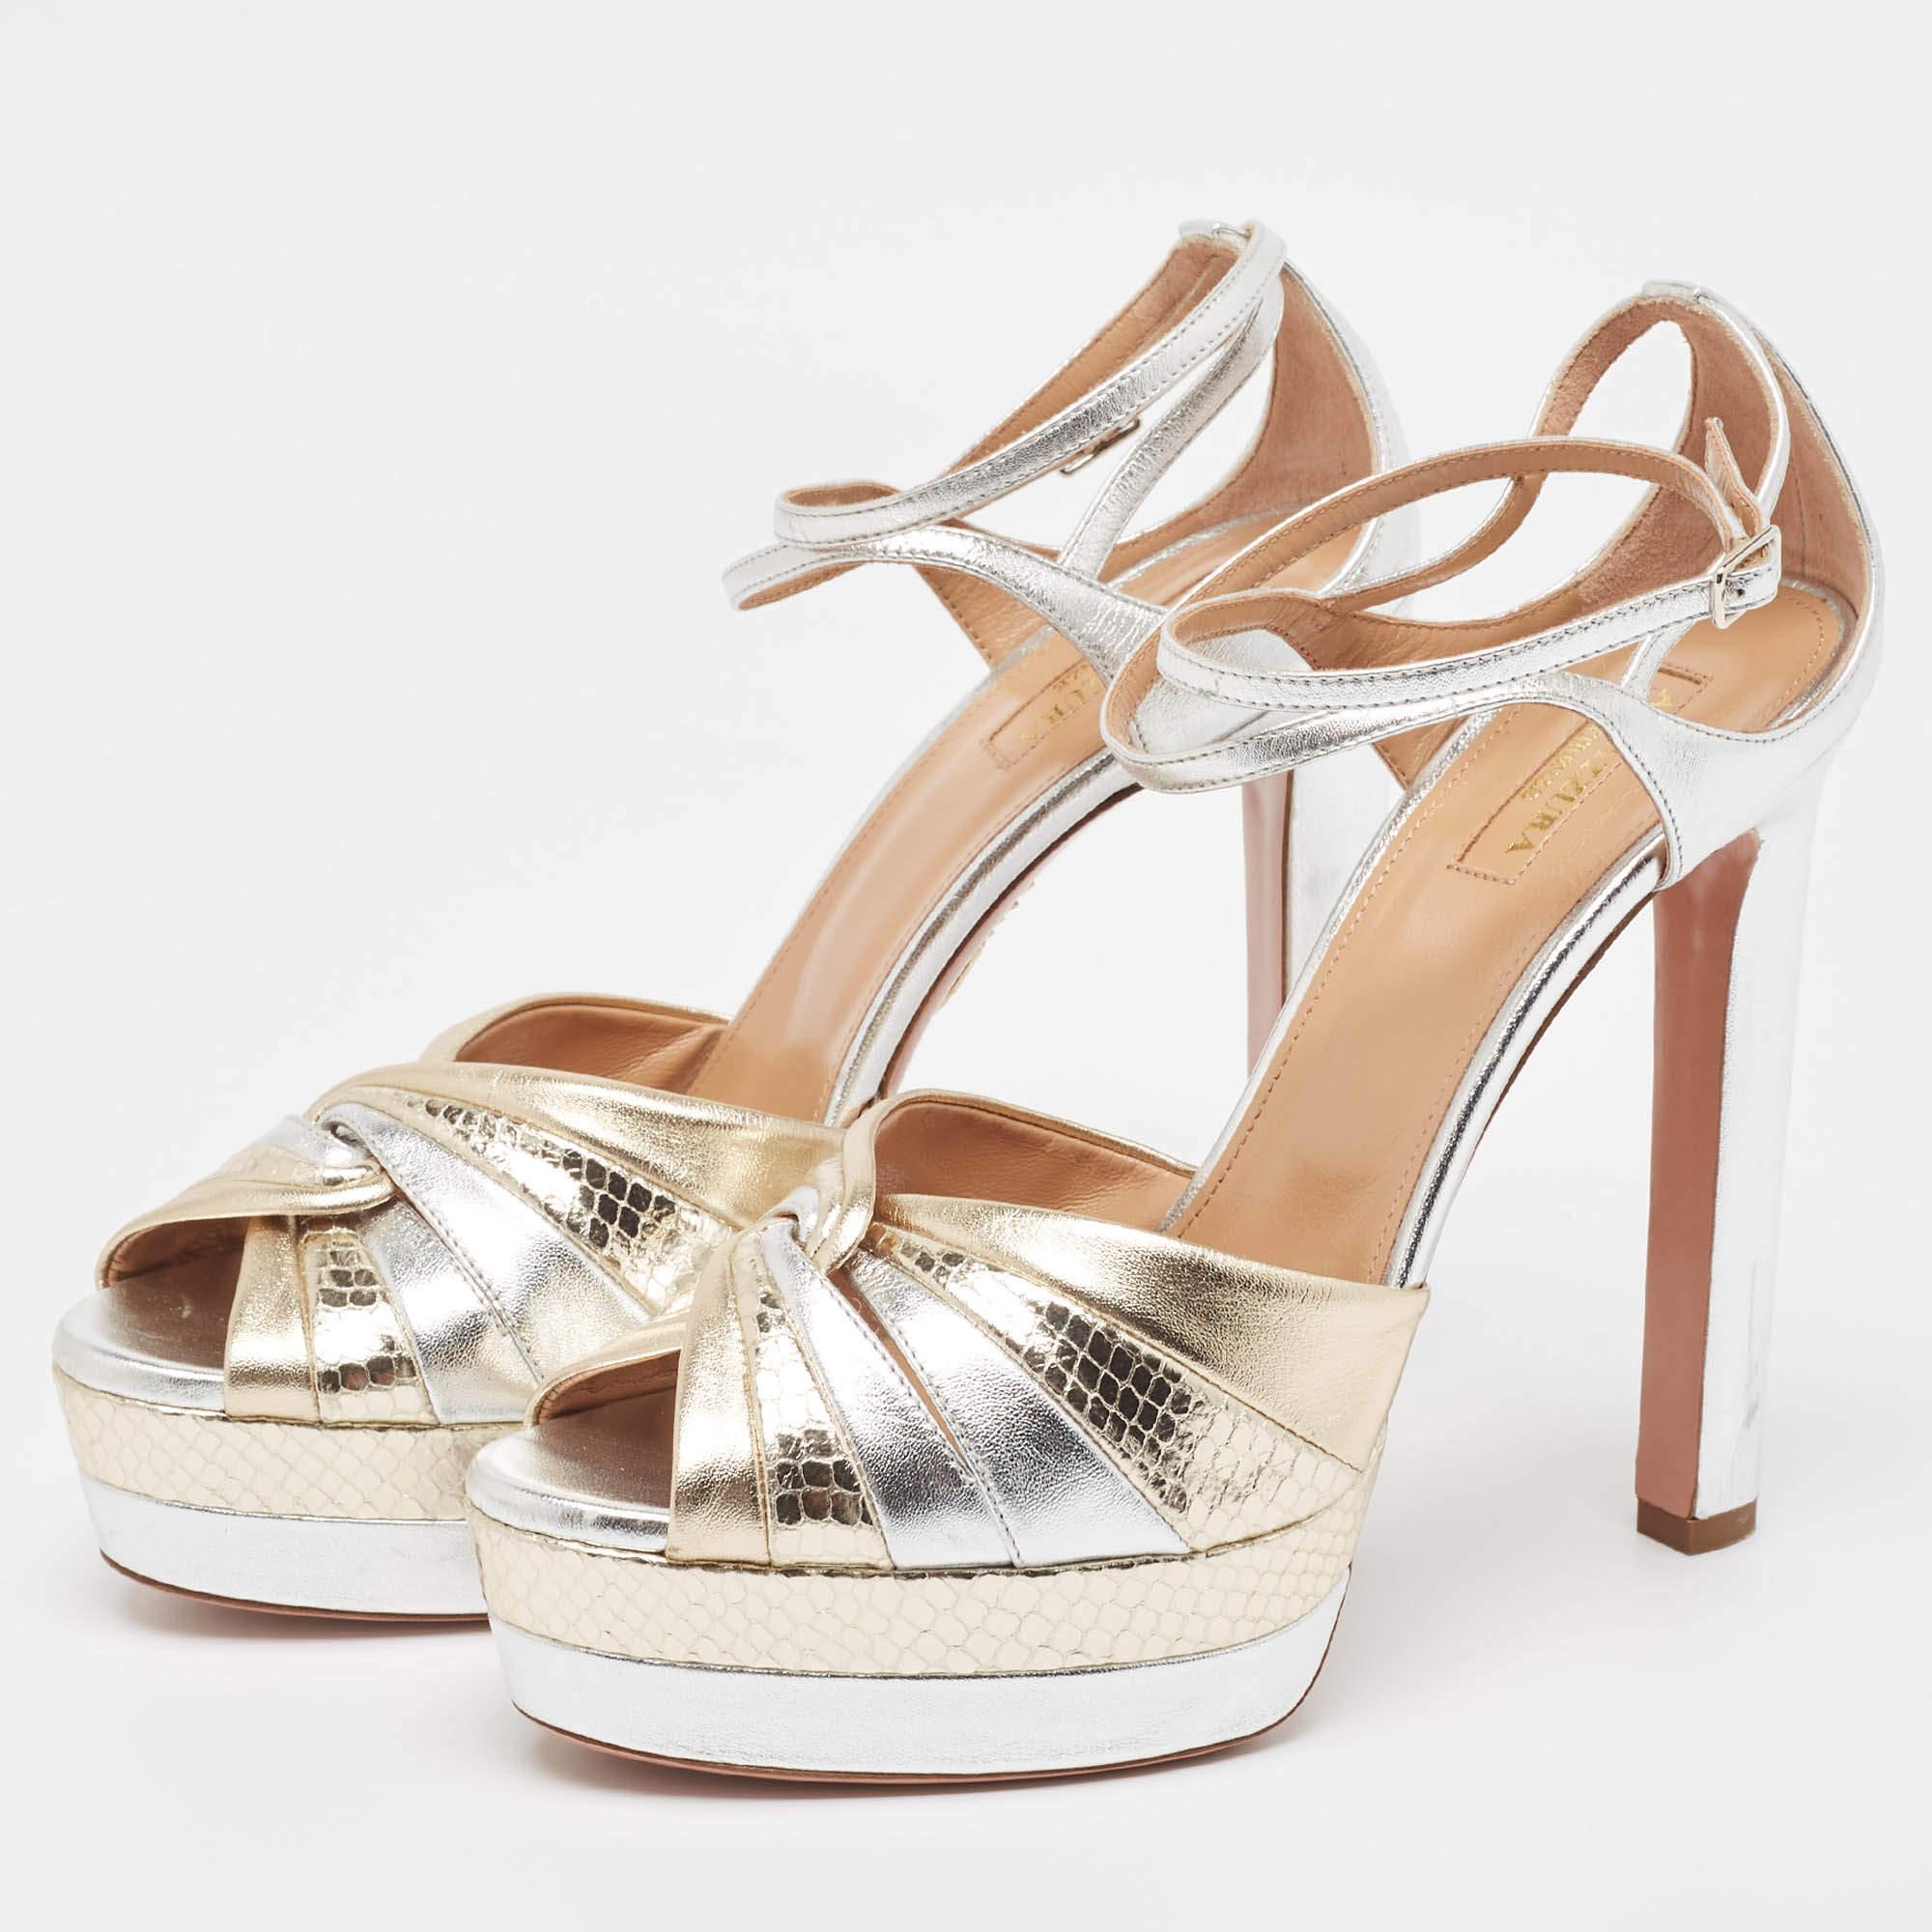 Aquazzura's classy take on footwear is captured in this design. The sandals are wonderfully crafted using high-quality materials and set on durable soles. Wear yours with cropped hemlines to spotlight the modern construction.

Includes: Original